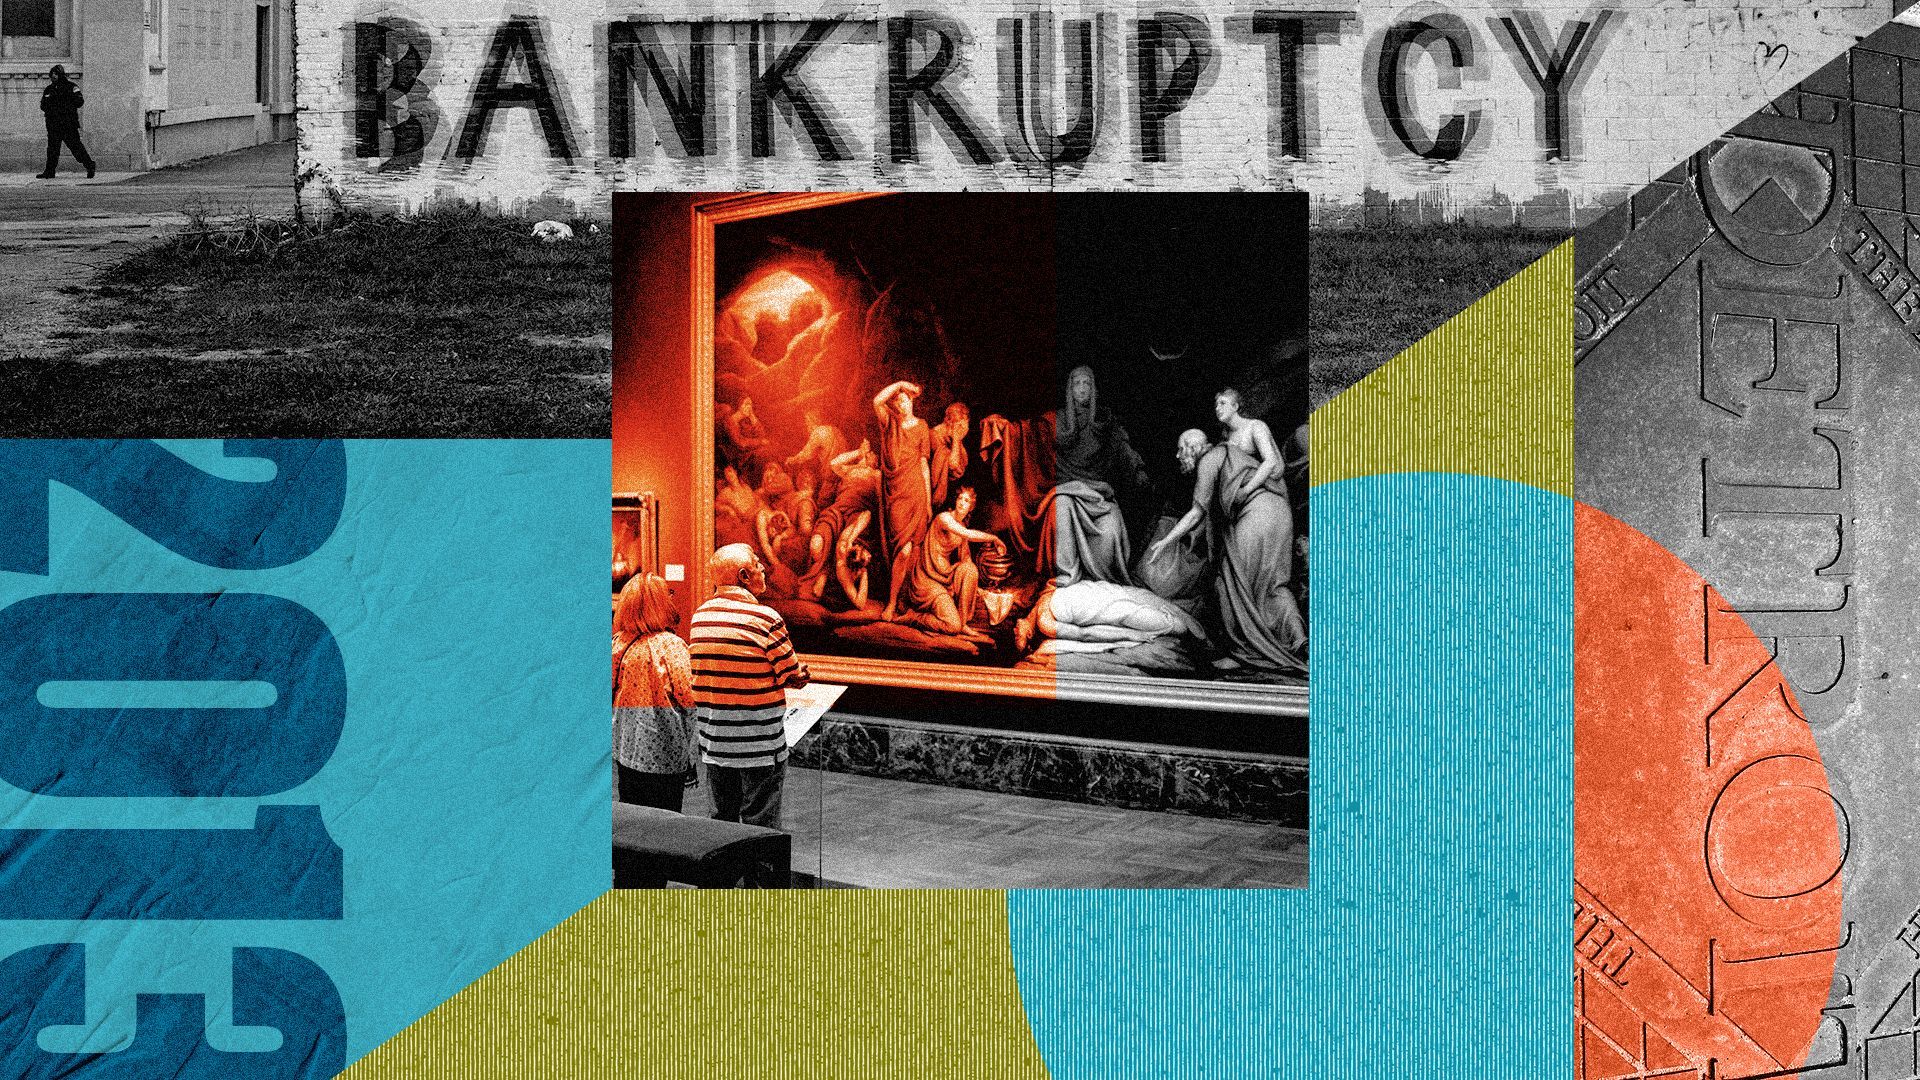 Photo illustration of two people looking at a painting in a museum with "Bankruptcy" graffiti, a Detroit plaque, and "2013" within geometric shapes.